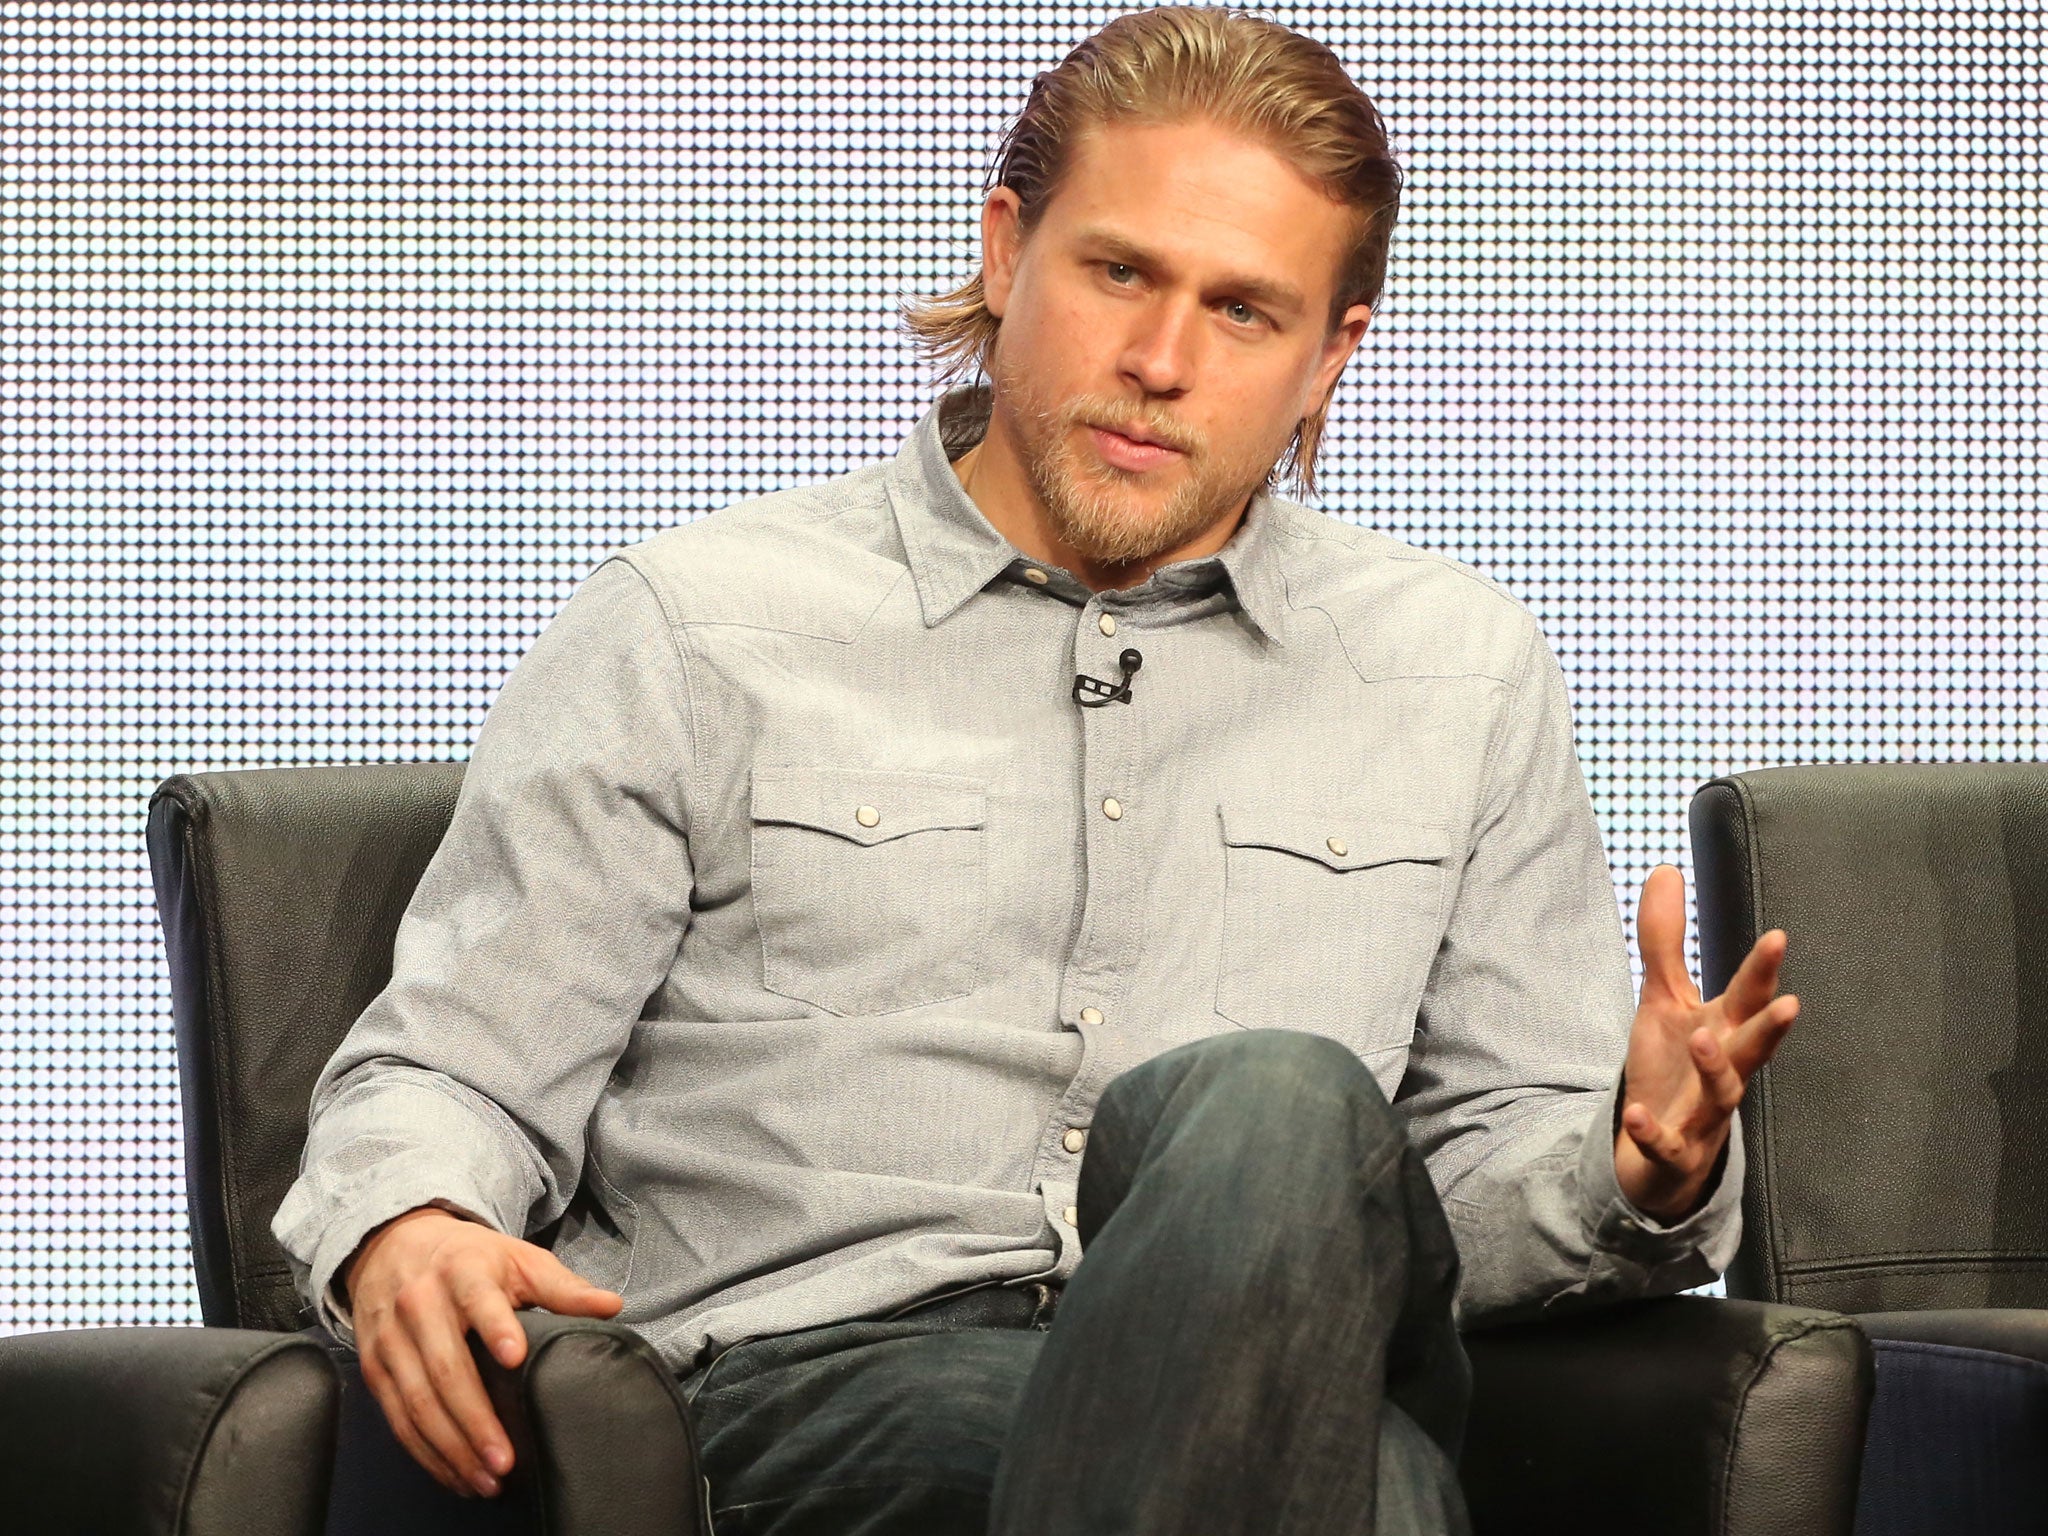 Charlie Hunnam has left Fifty Shades of Grey